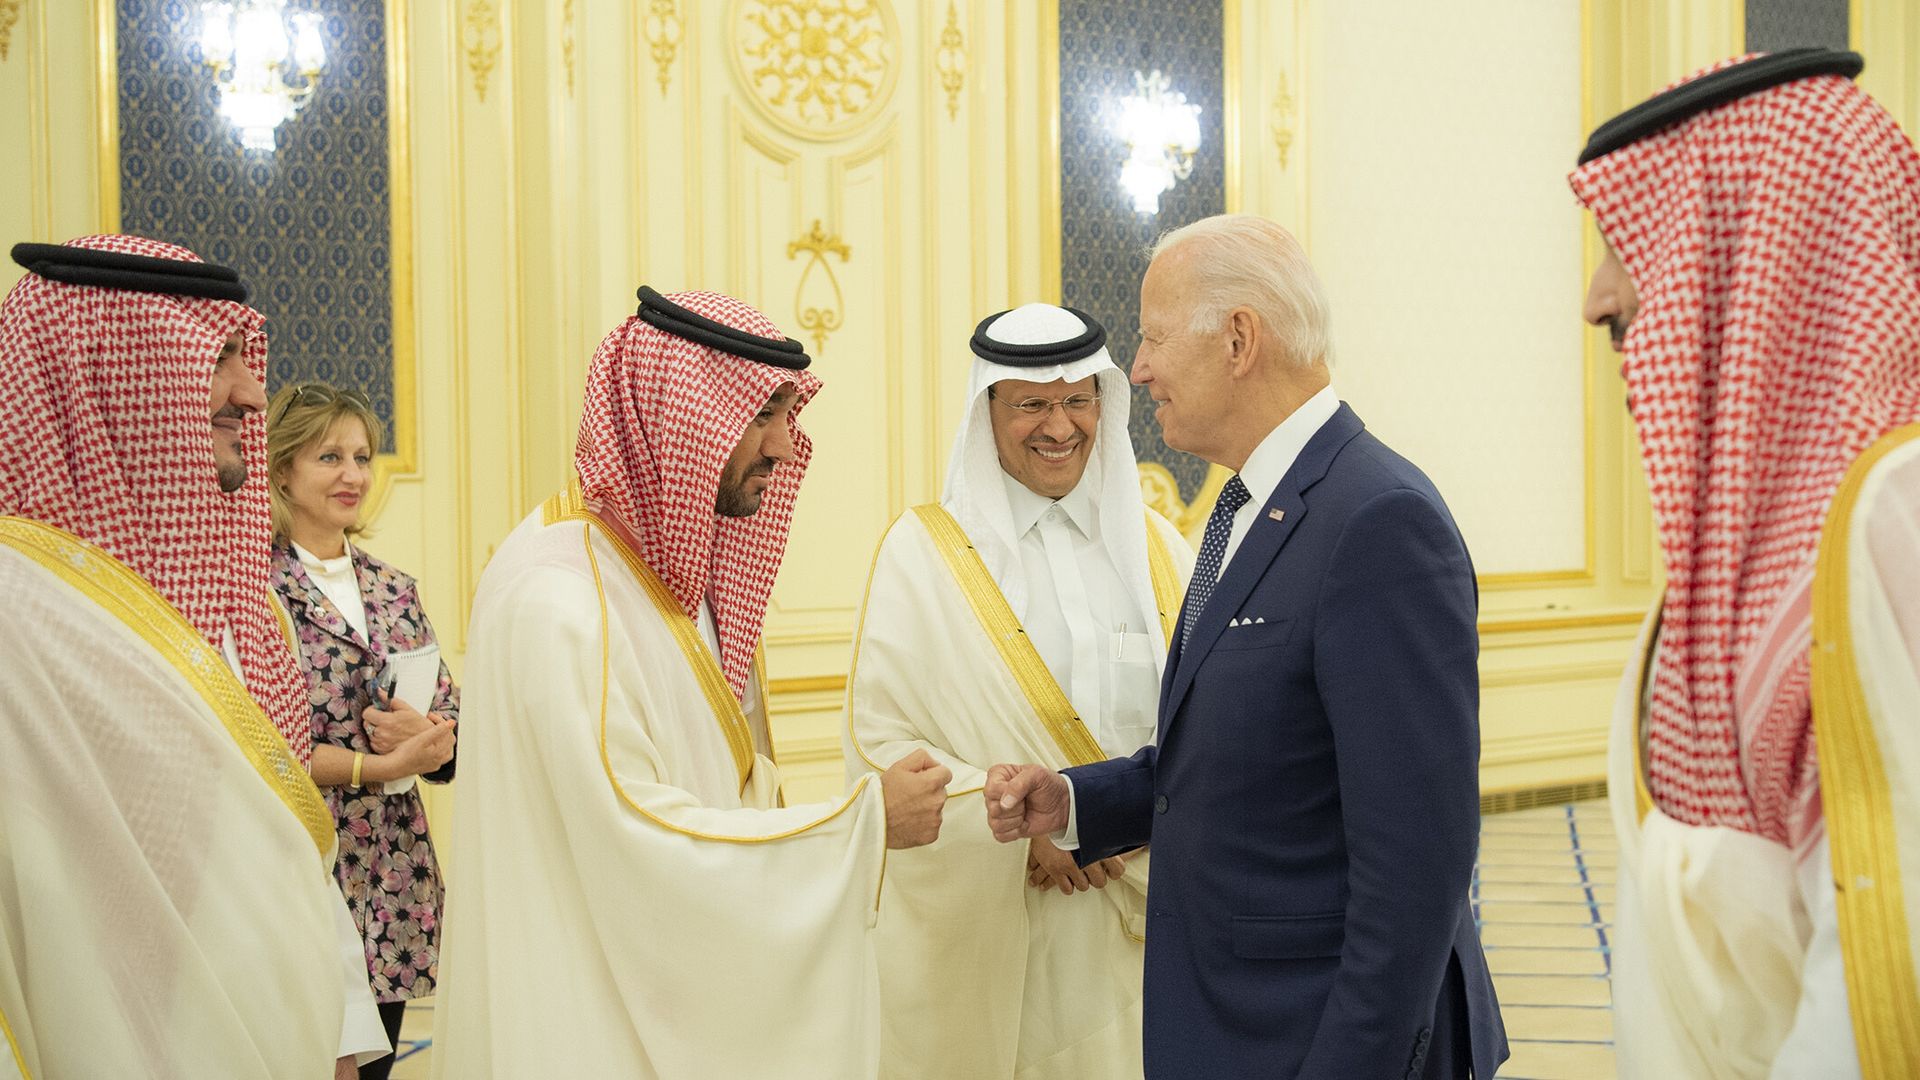 Top Biden officials have recently visited Saudi Arabia to repair a relationship that is vital to the interests of both nations.